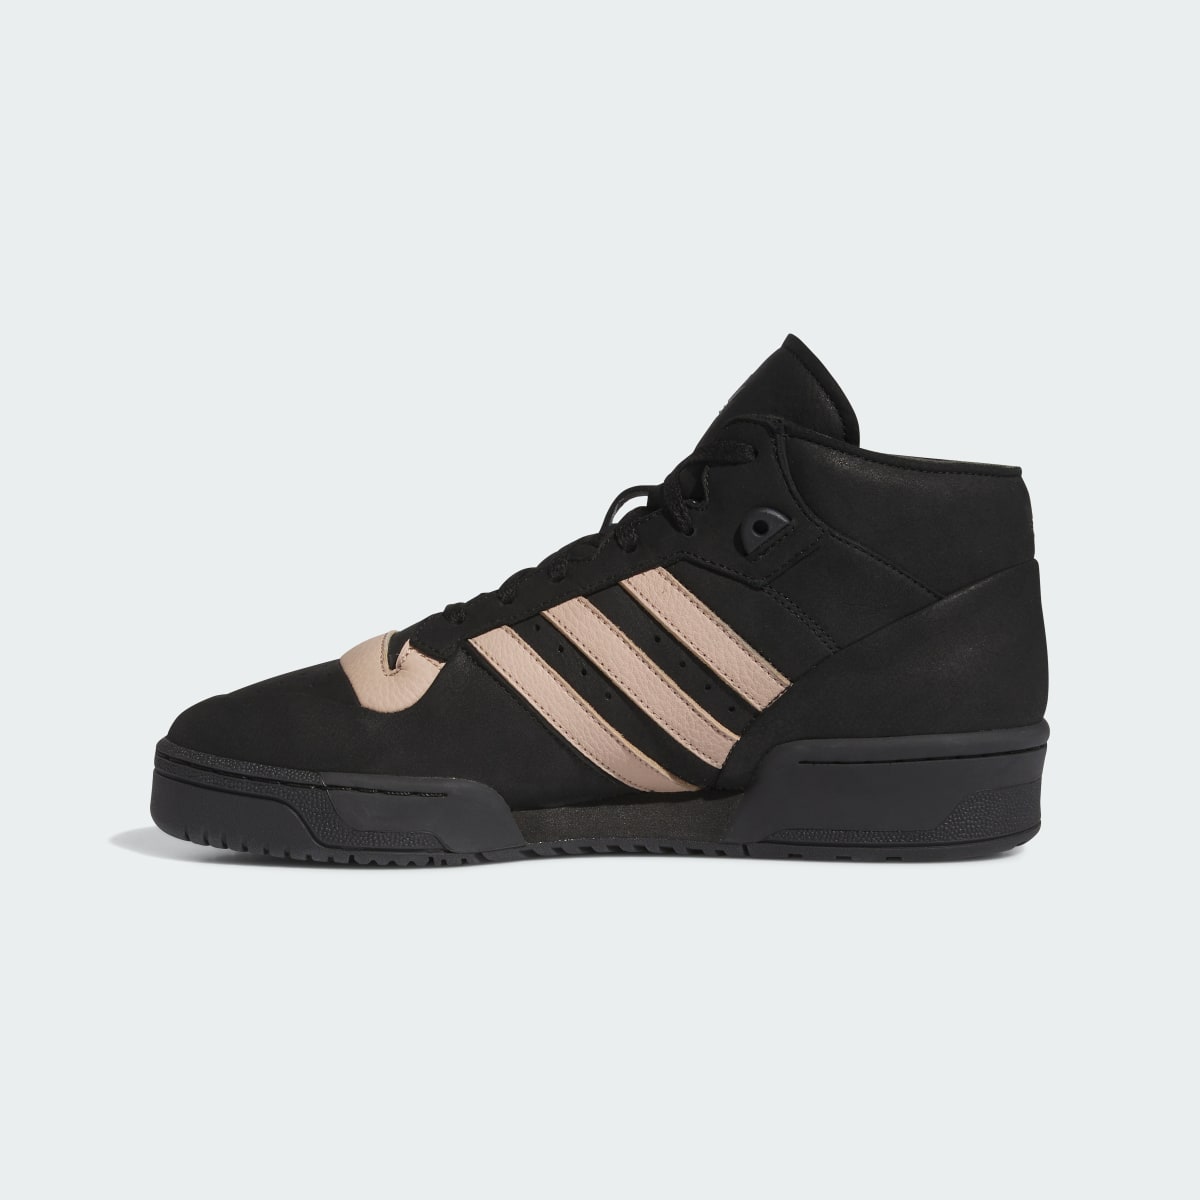 Adidas Rivalry Mid 001 Shoes. 7